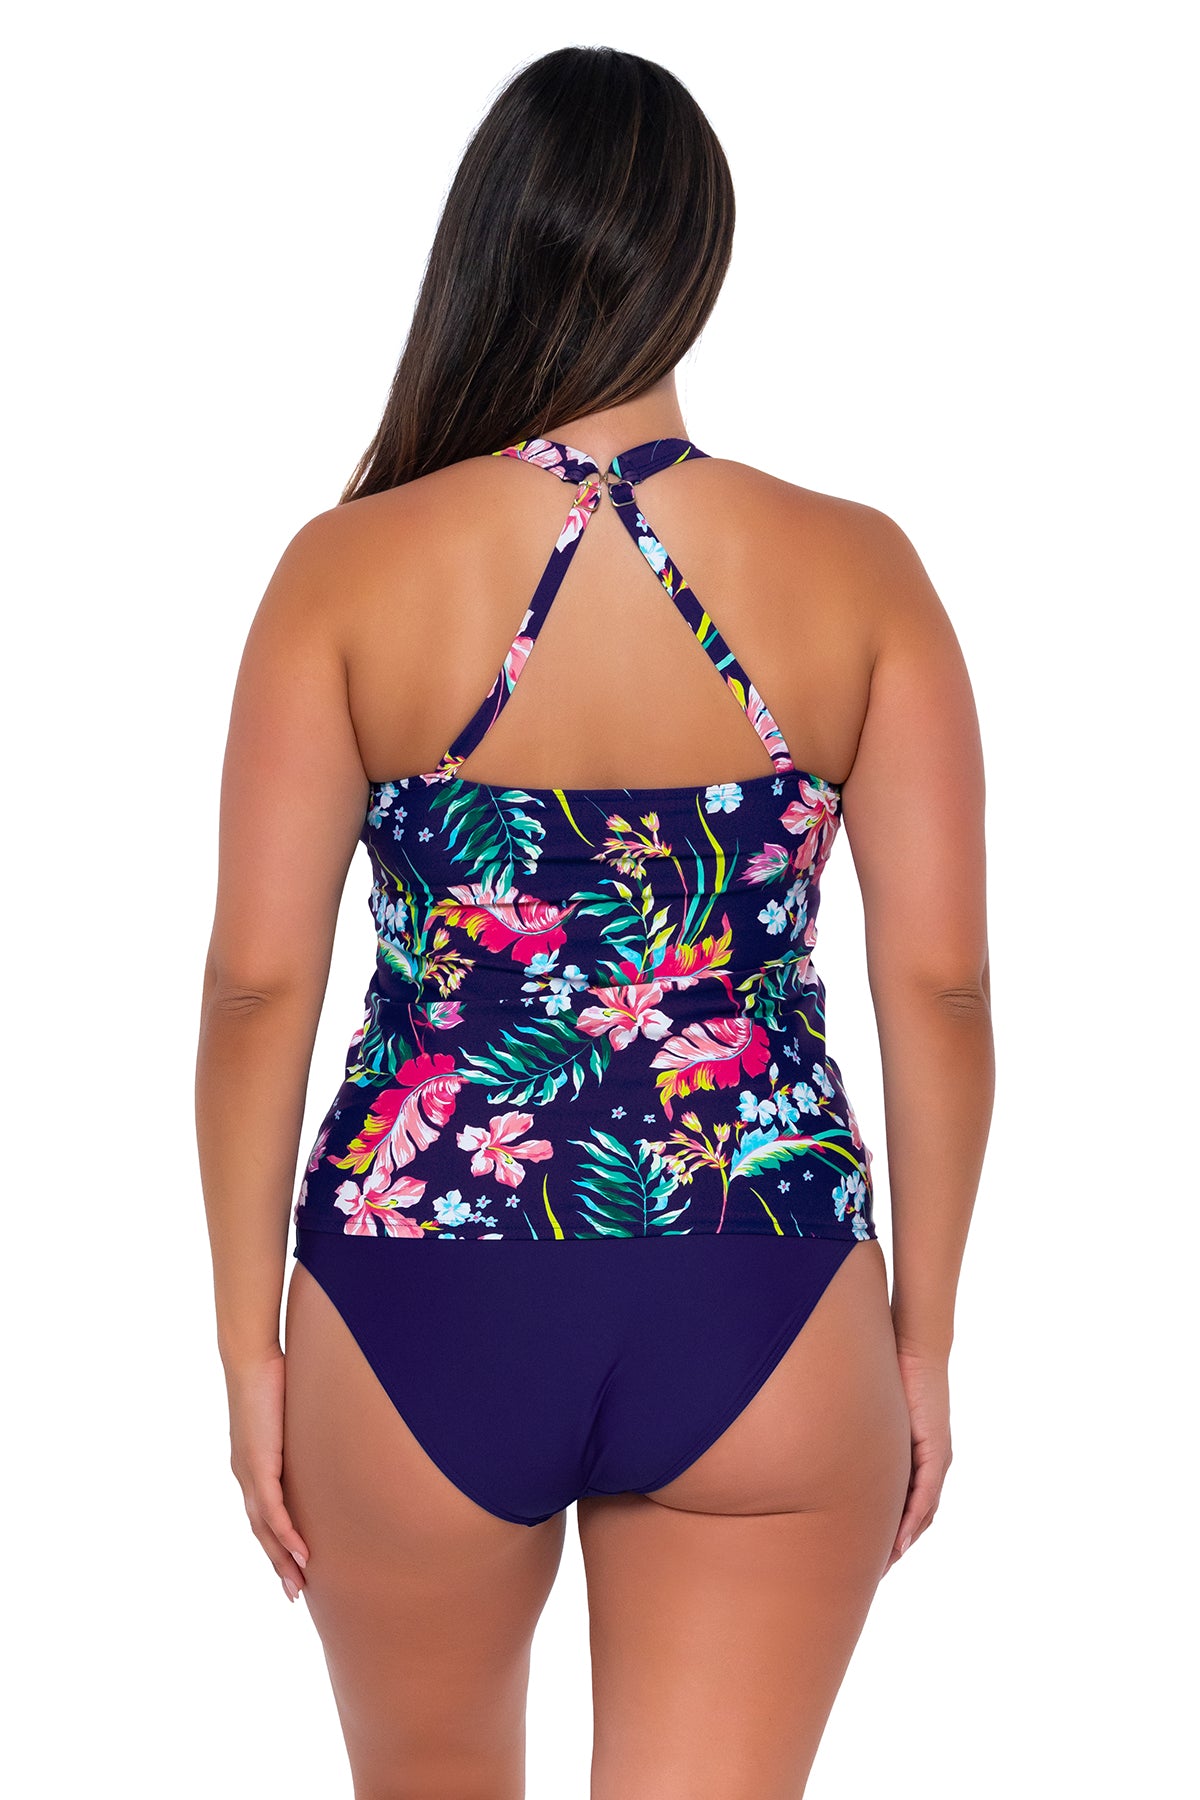 Back pose #1 of Nicky wearing Sunsets Escape Island Getaway Emerson Tankini Top showing crossback straps with matching Hannah High Waist bikini bottom